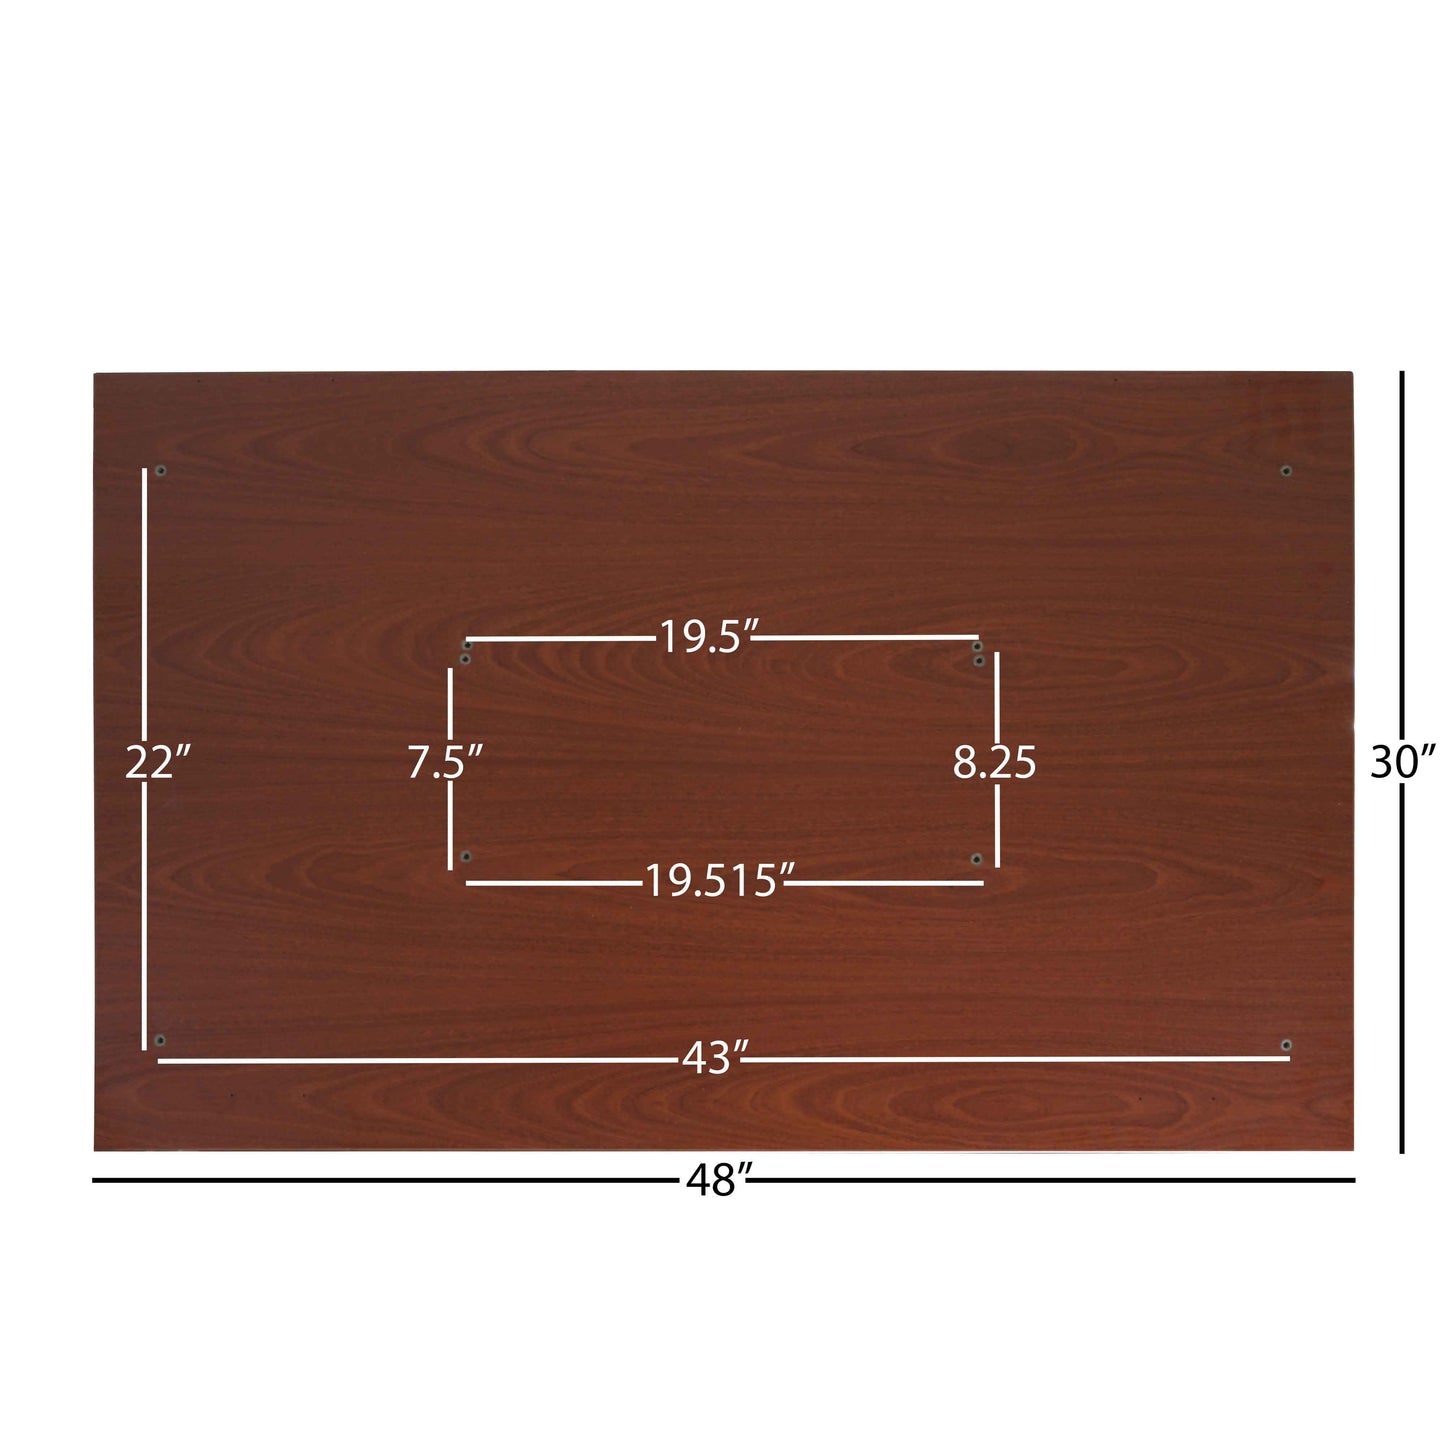 Scratch and Dent, Universal Desk Top - 30-in. x 48-in. Wood - view 2